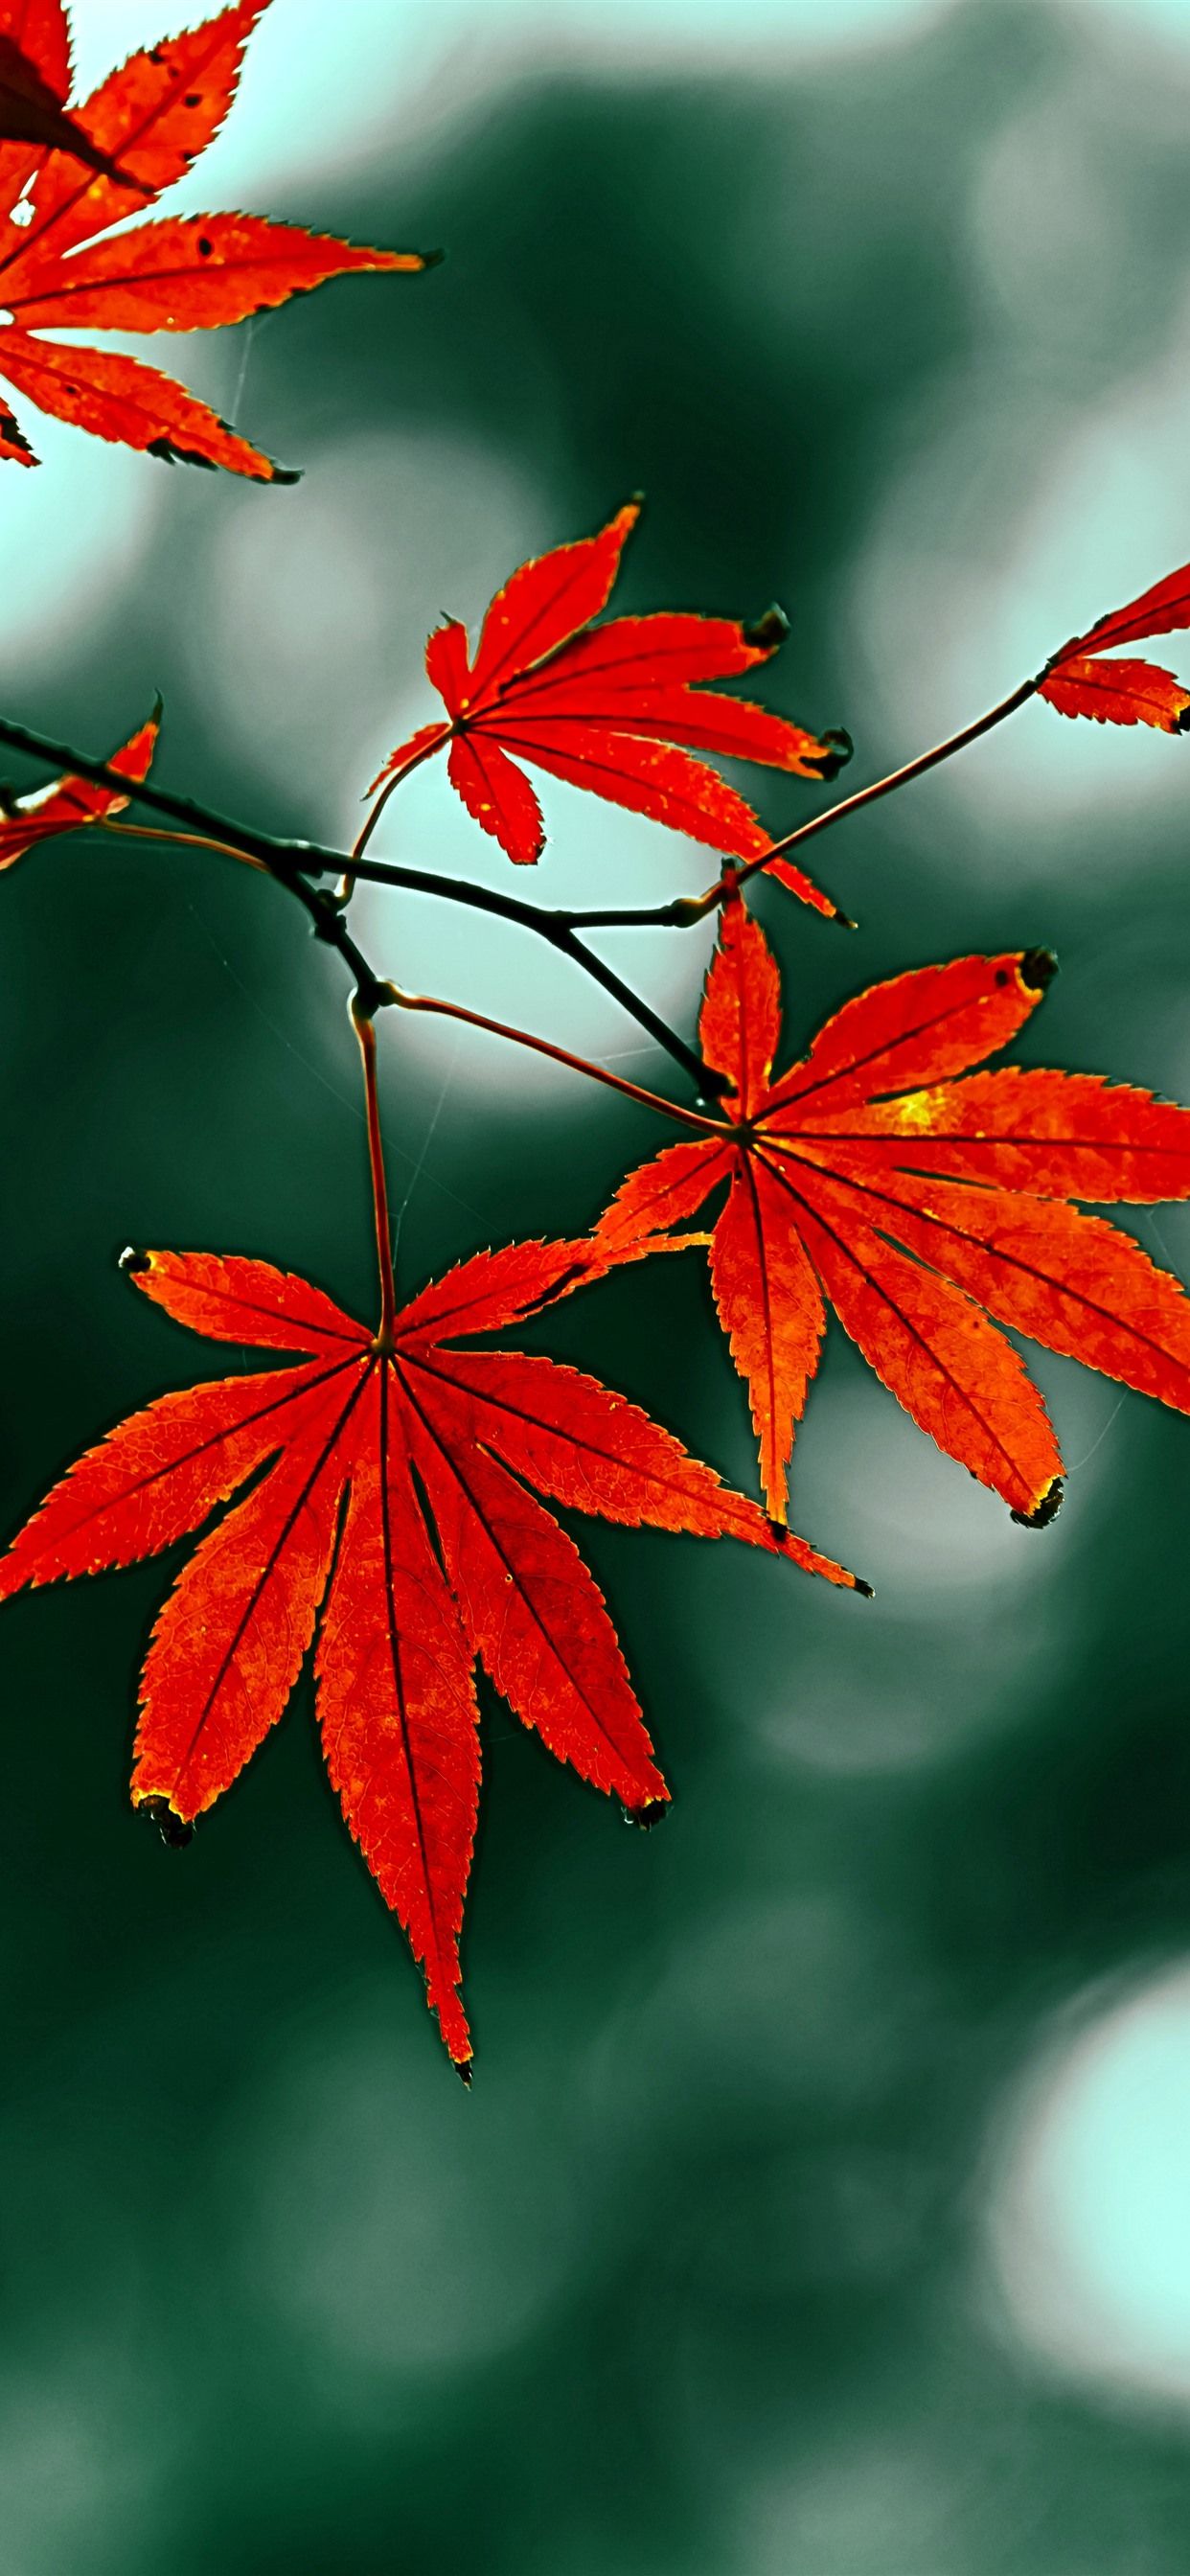 Red maple leaves, hazy, autumn 1242x2688 iPhone 11 Pro/XS Max wallpaper, background, picture, image